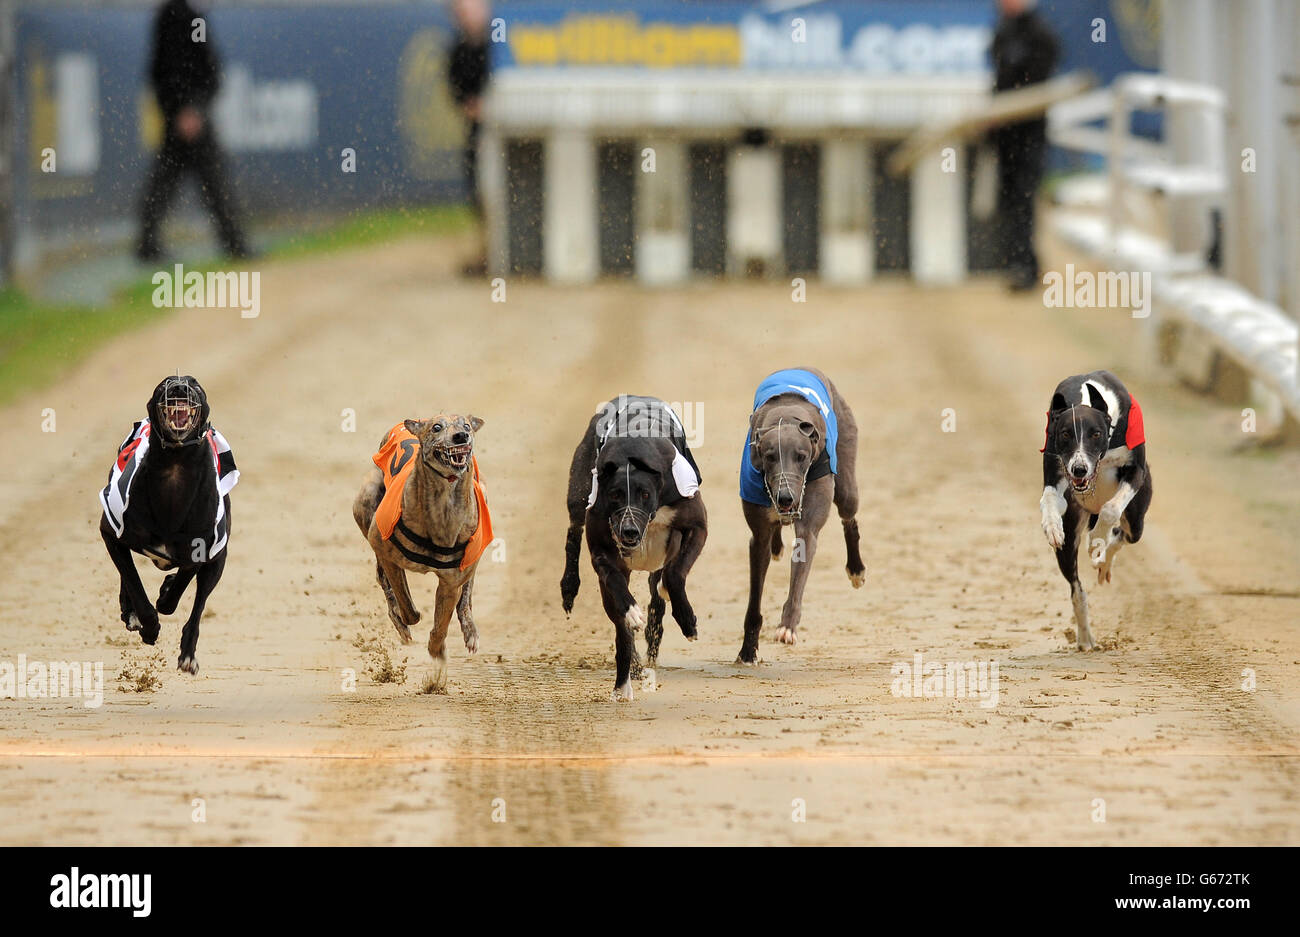 Droopys Jet (no.6 black/white), Skate On (no.5 orange), Kereight King (no.4 black), Kilara Missy (no.3 white), Teejays Bluehawk (no.2 blue) and Tyrur Sugar Ray (no.1 red) in action during the William Hill Derby 3rd Round Heat 1 Stock Photo